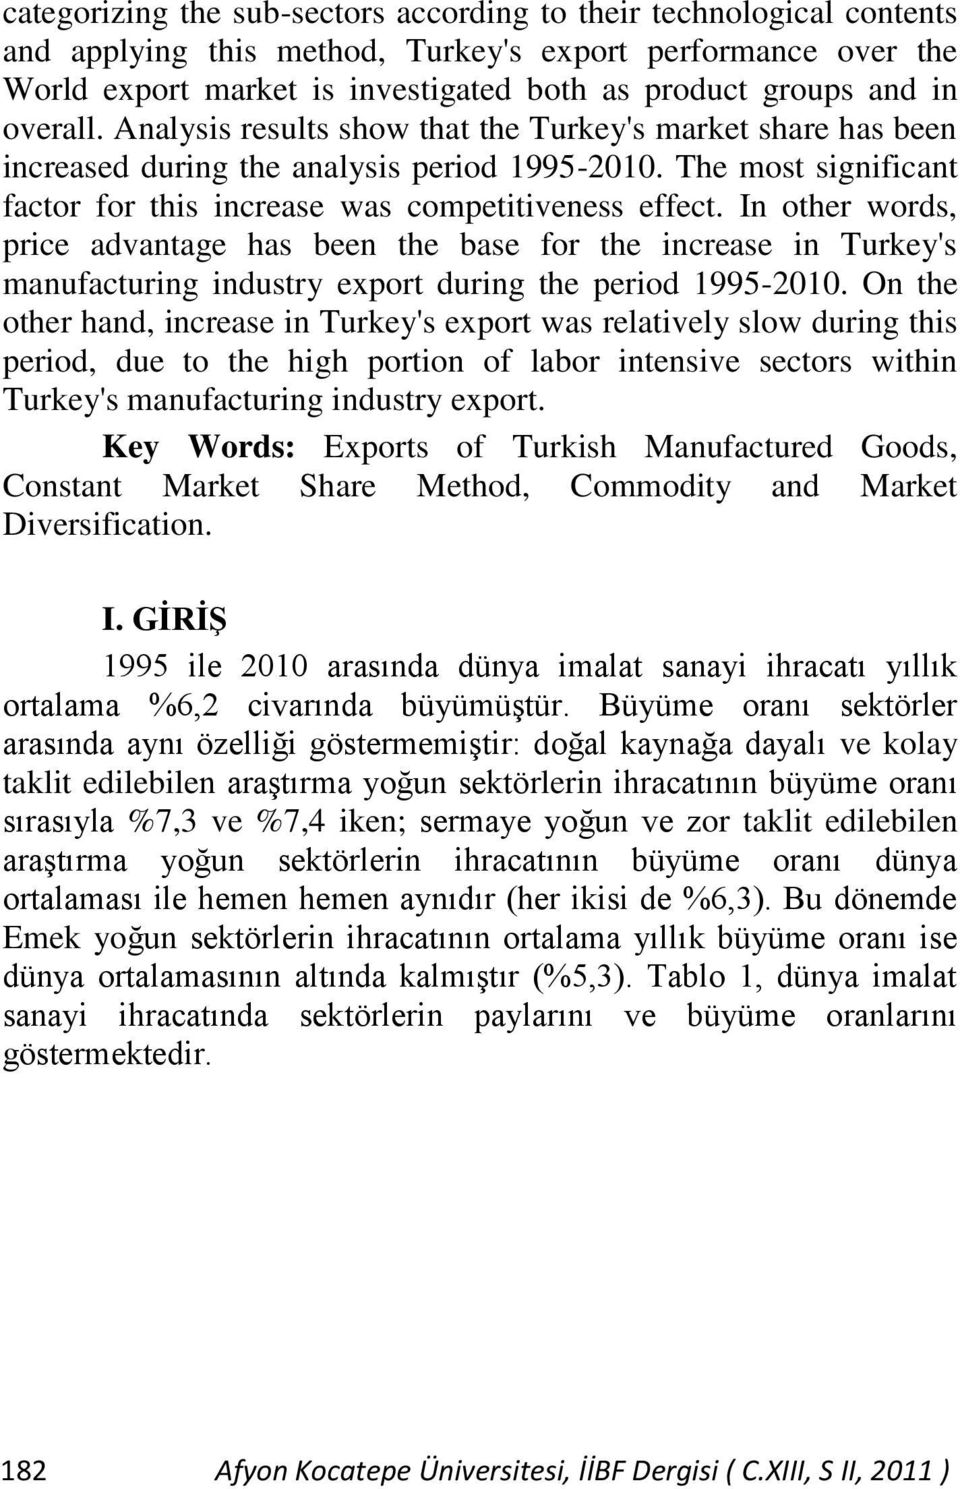 In other words, price advantage has been the base for the increase in Turkey's manufacturing industry export during the period 1995-2010.